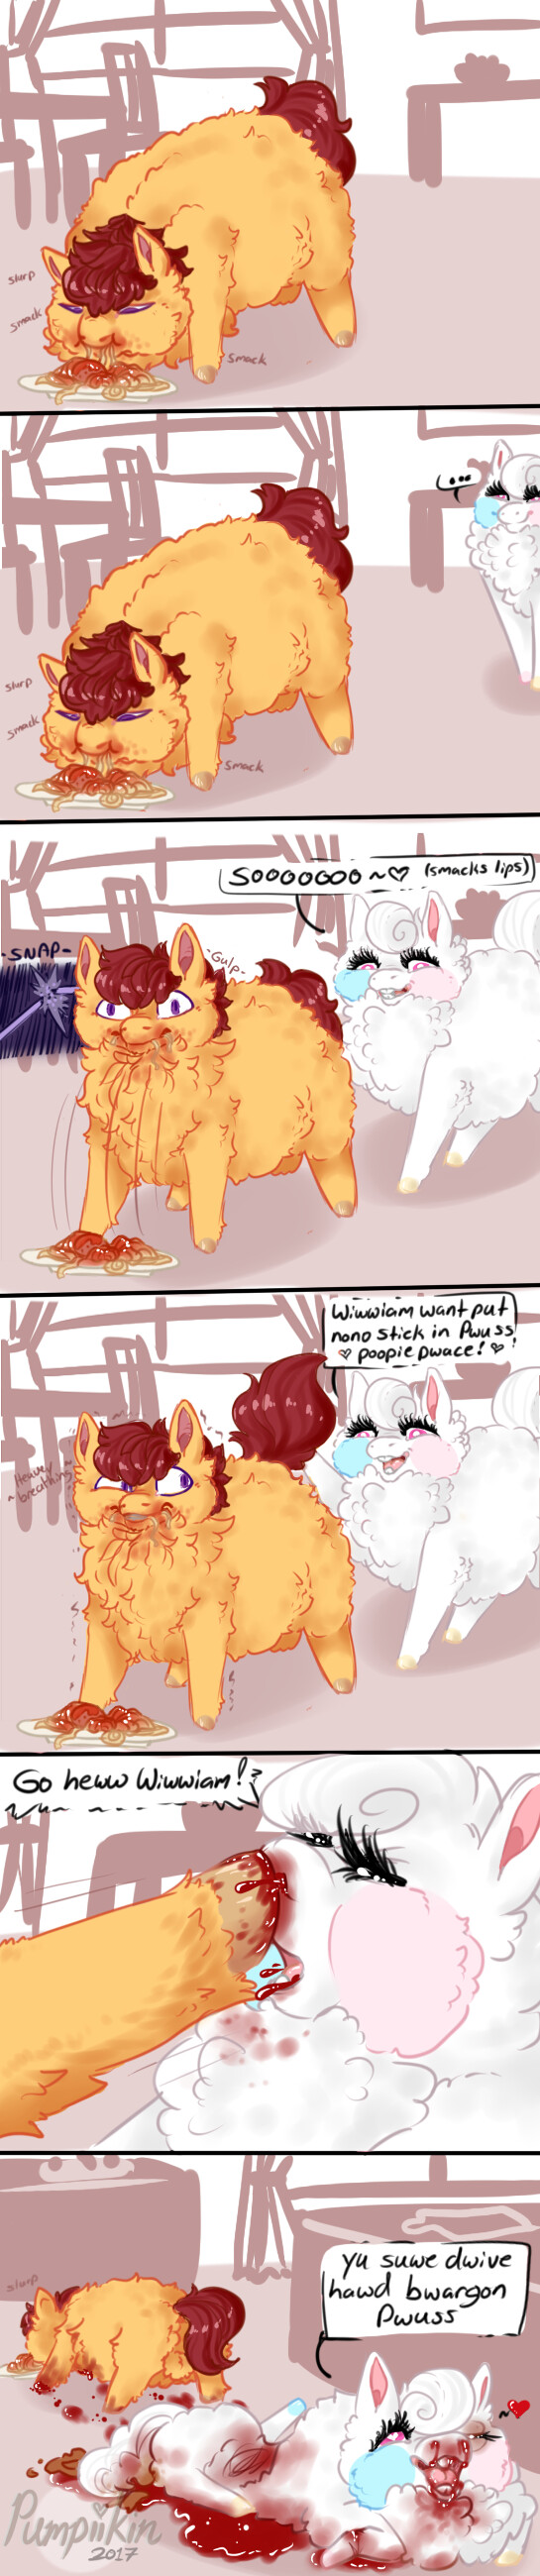 46537 - angry_fluffy artist_pumpiikin bleeding blood comic oc original_character poopie_place punch_to_the_nosie questionable sketti sour_puss spagetti white_fluffy william